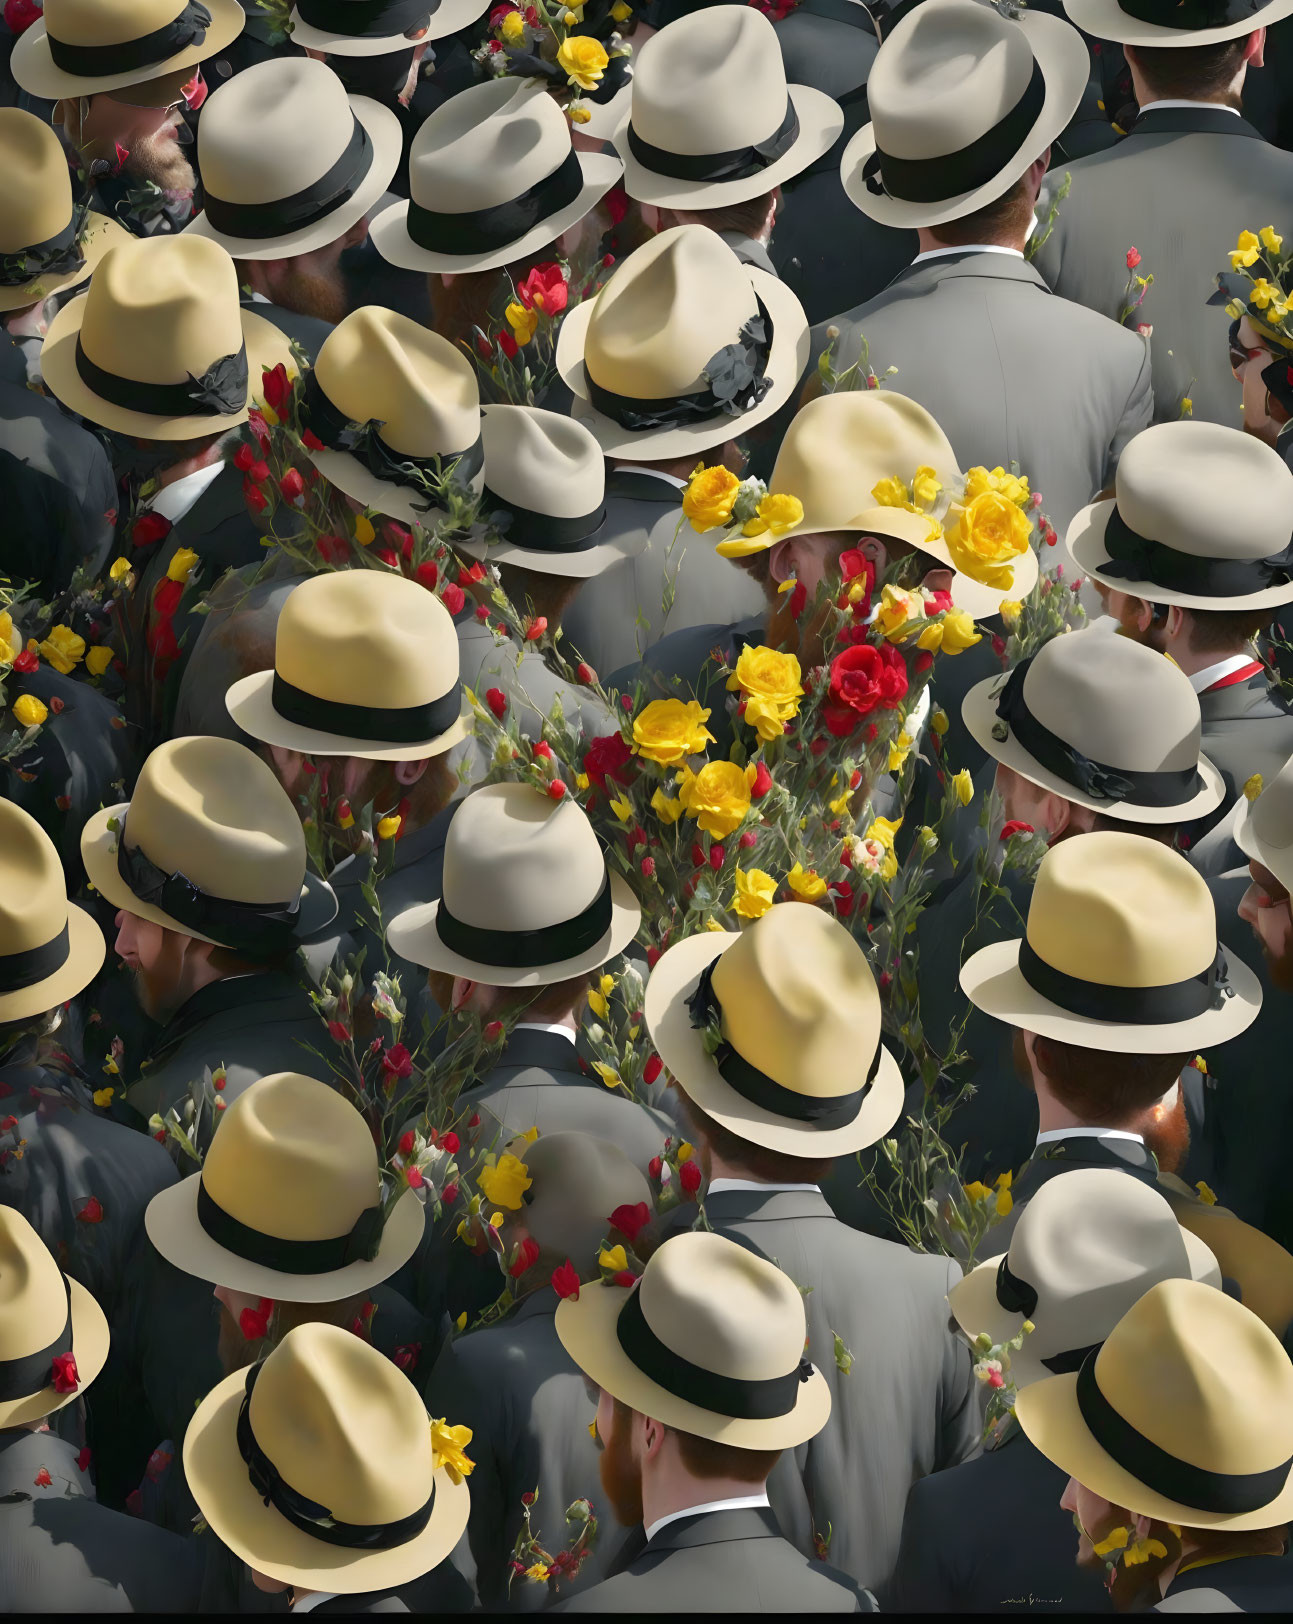 Crowd in Grey Suits with Colorful Flower Hats